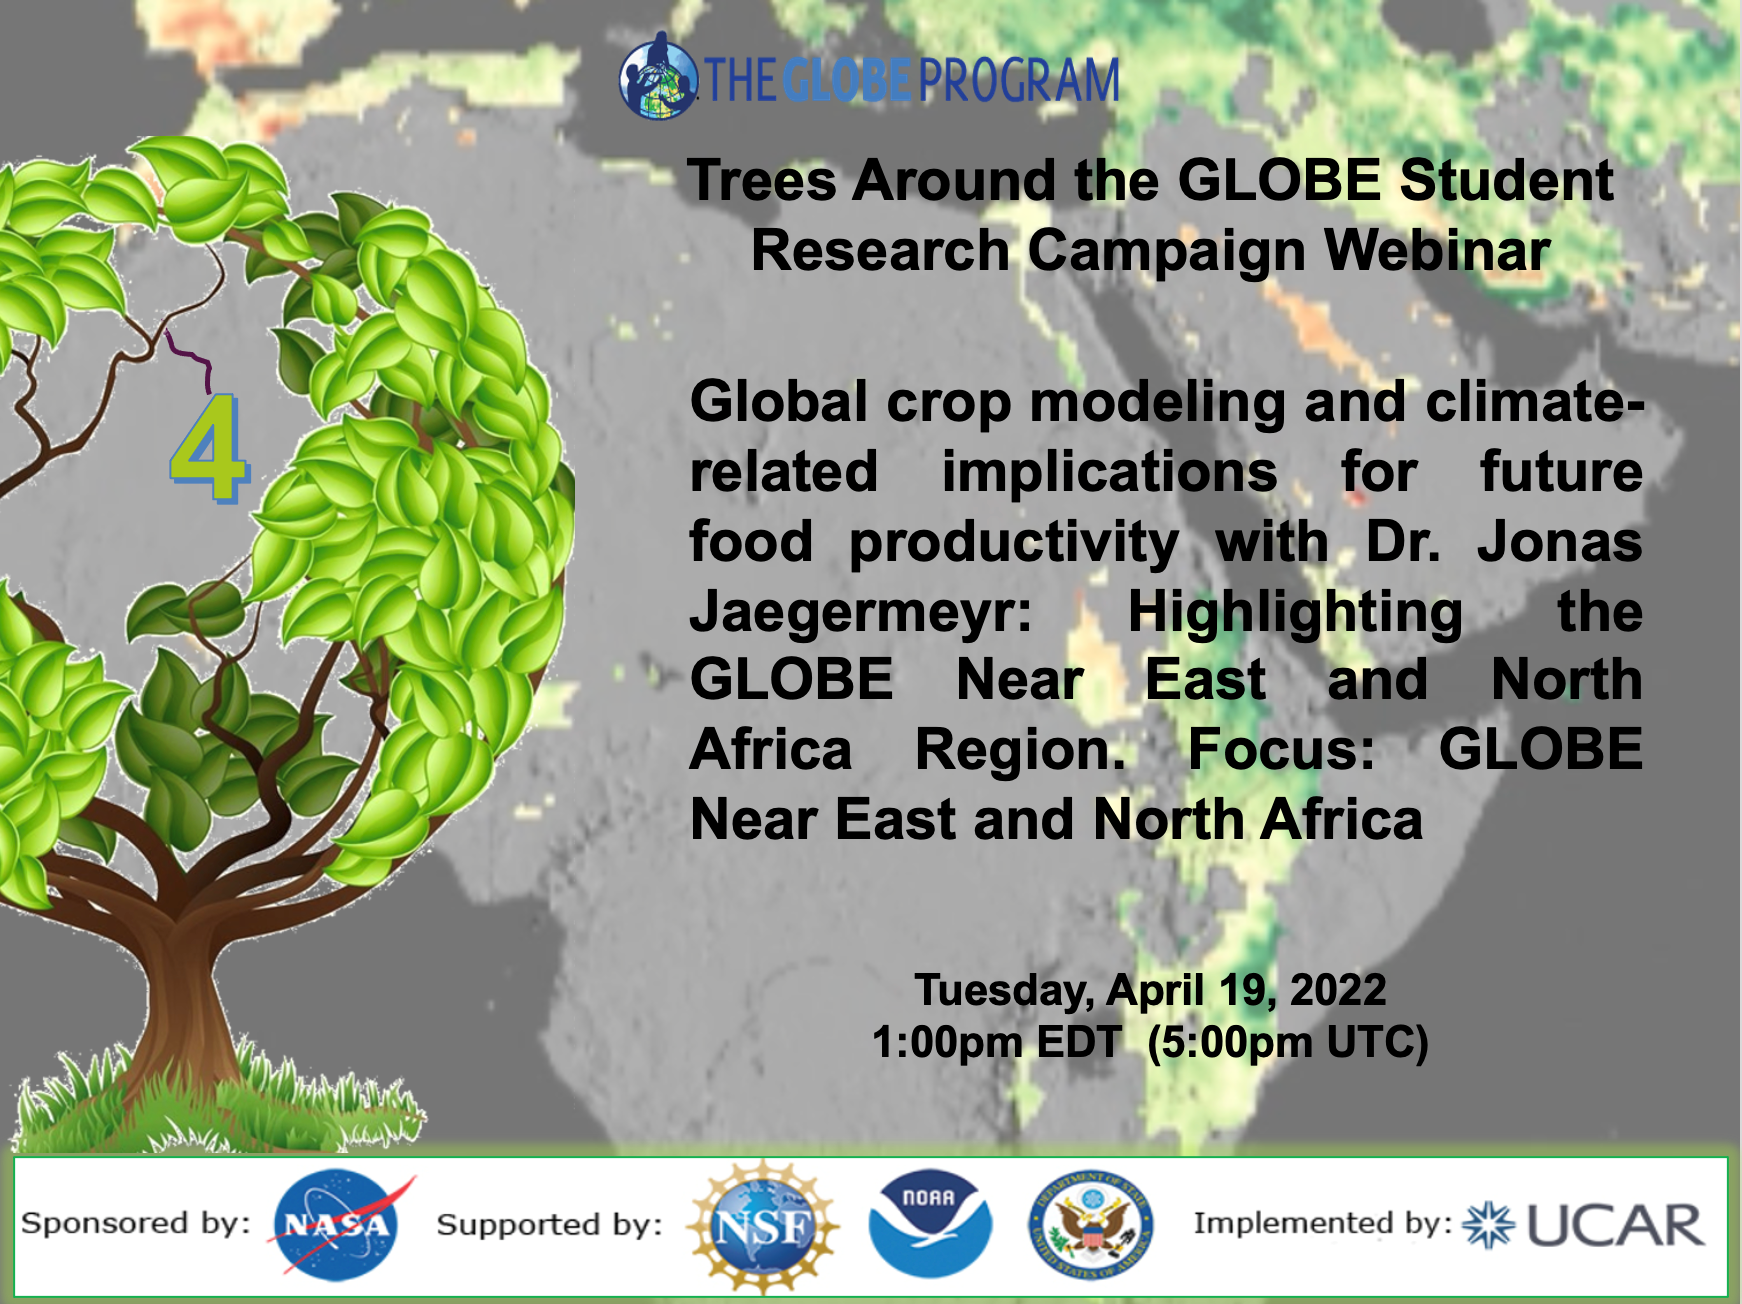 The 19 April Trees Around the GLOBE webinar shareable, with the title of the webinar